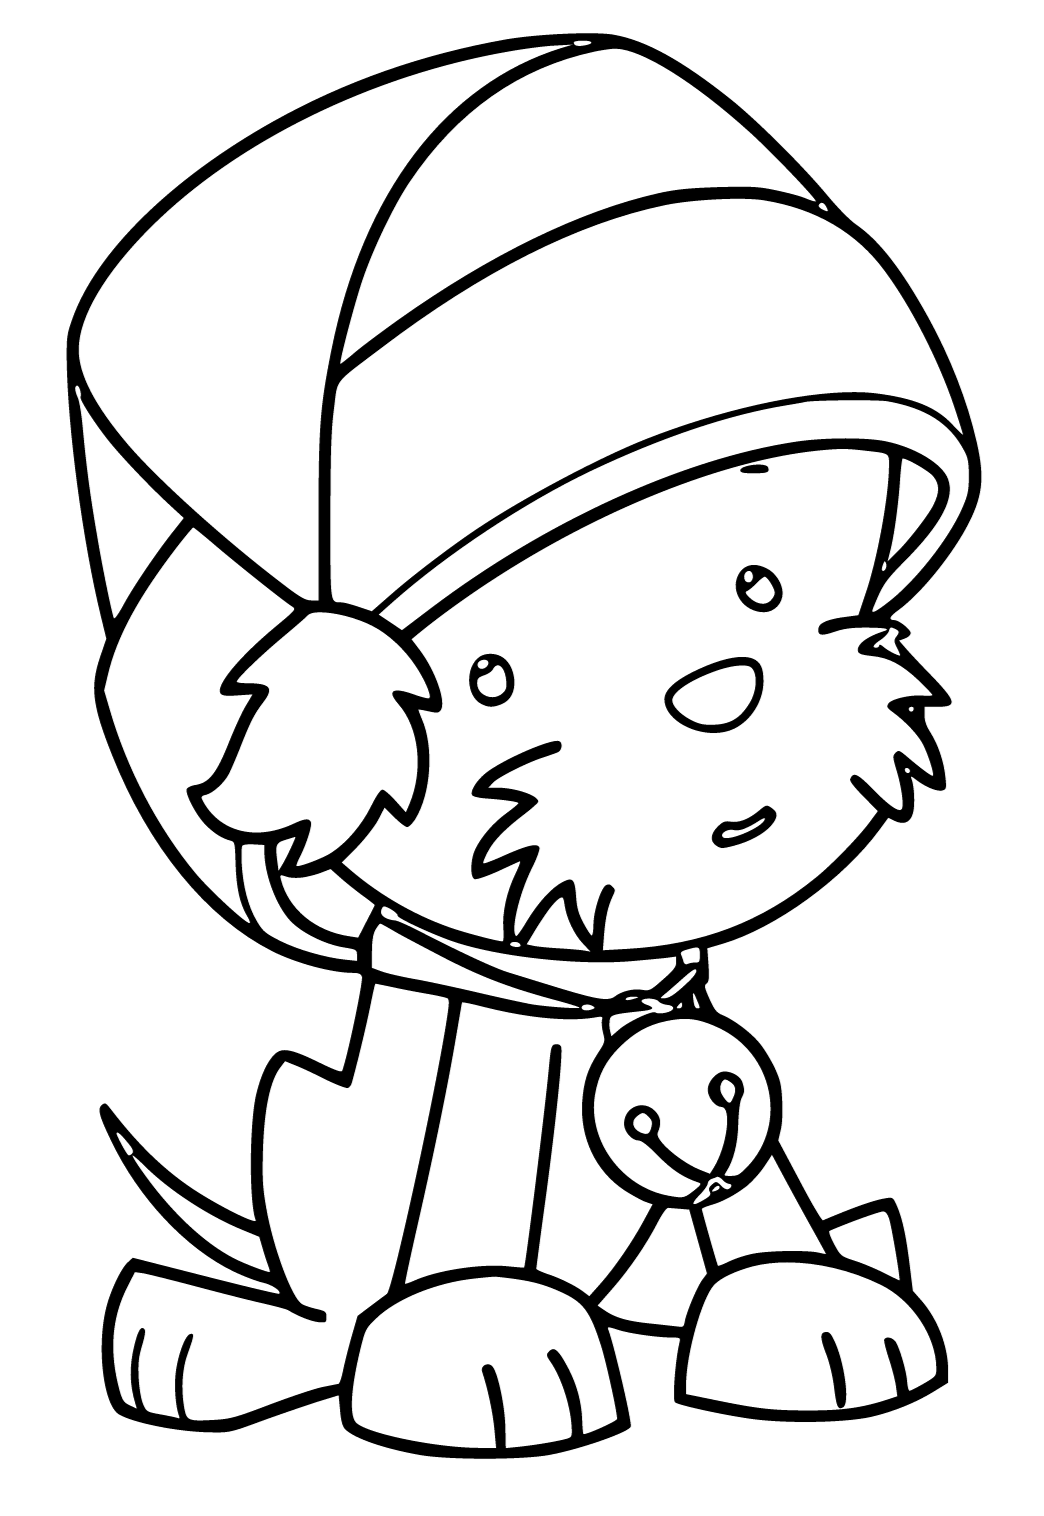 Free printable christmas cap coloring page for adults and kids